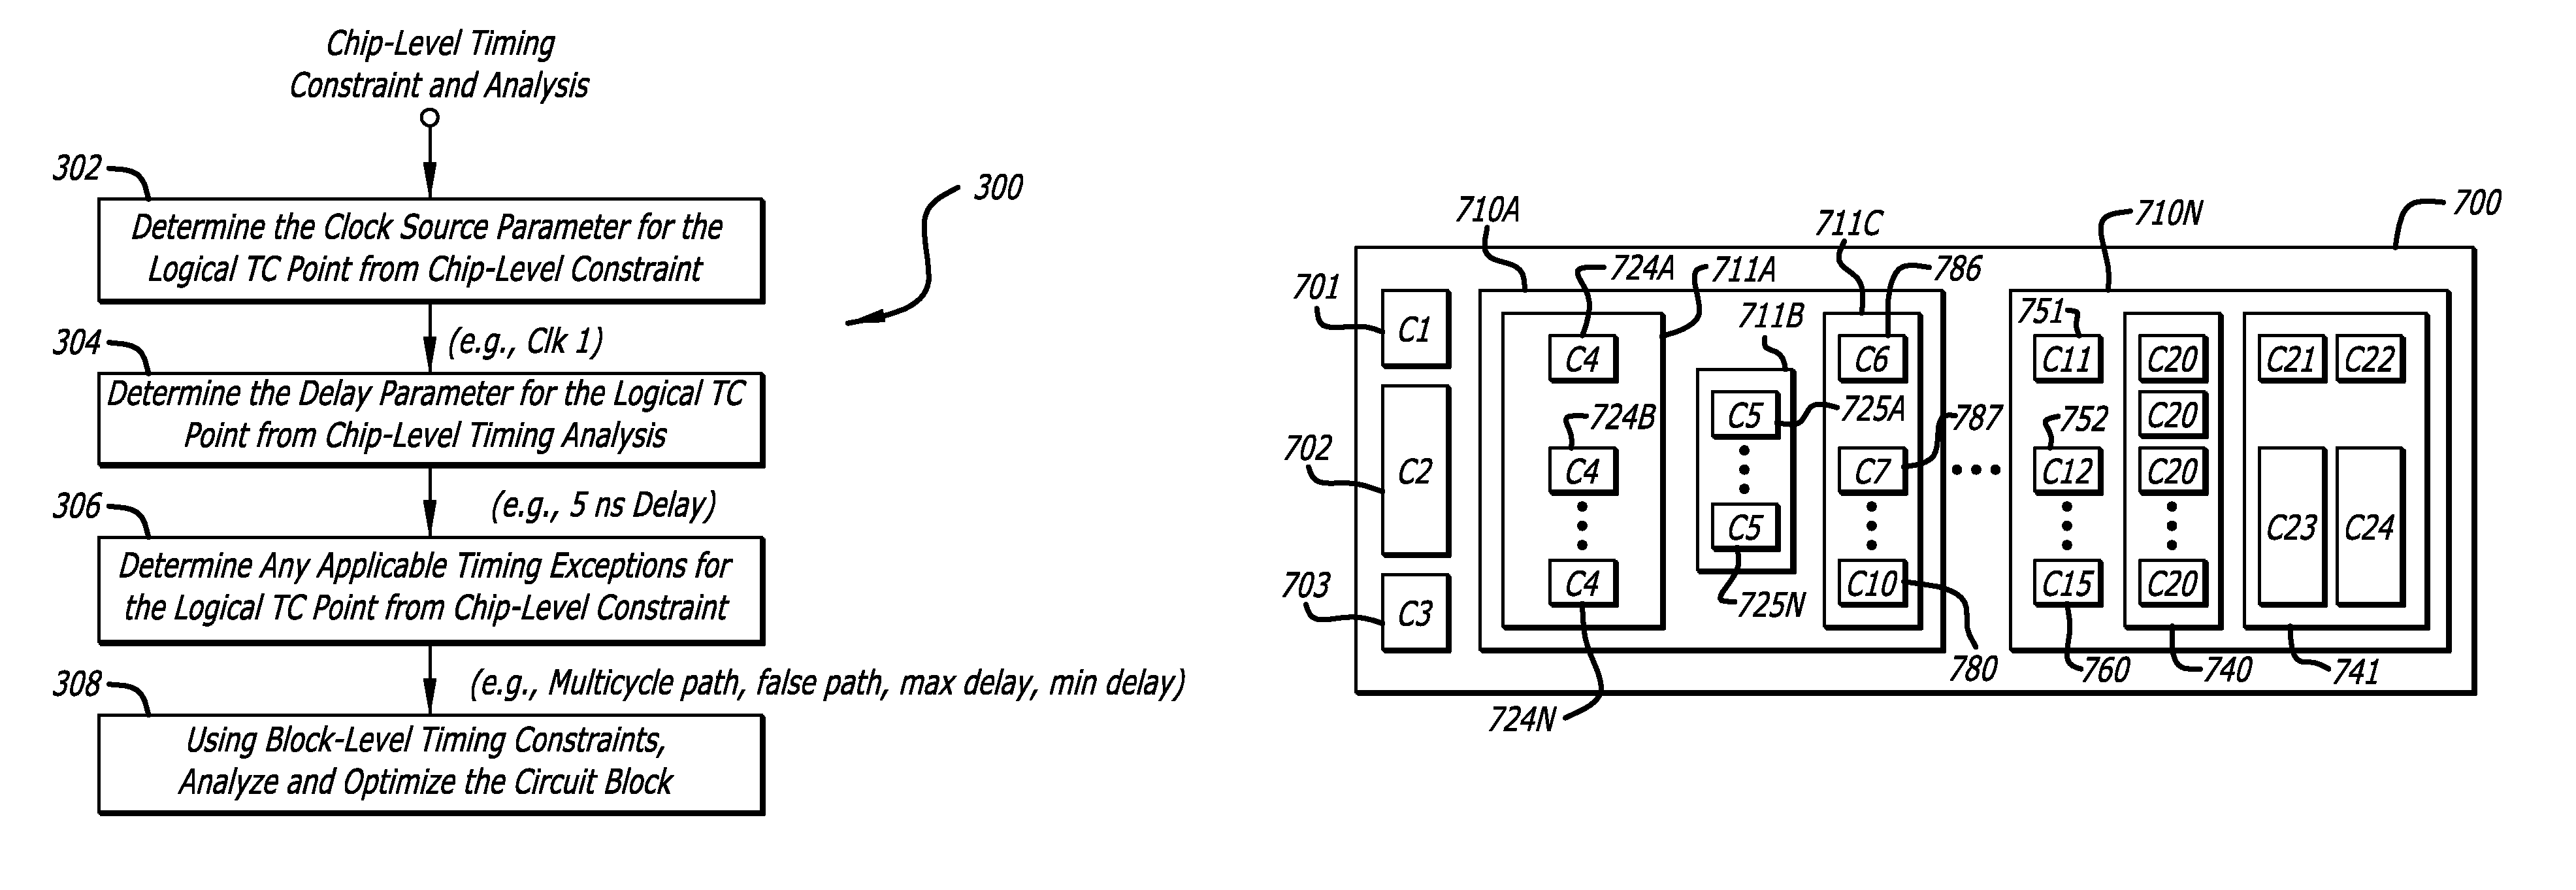 System and method of generating hierarchical block-level timing constraints from chip-level timing constraints